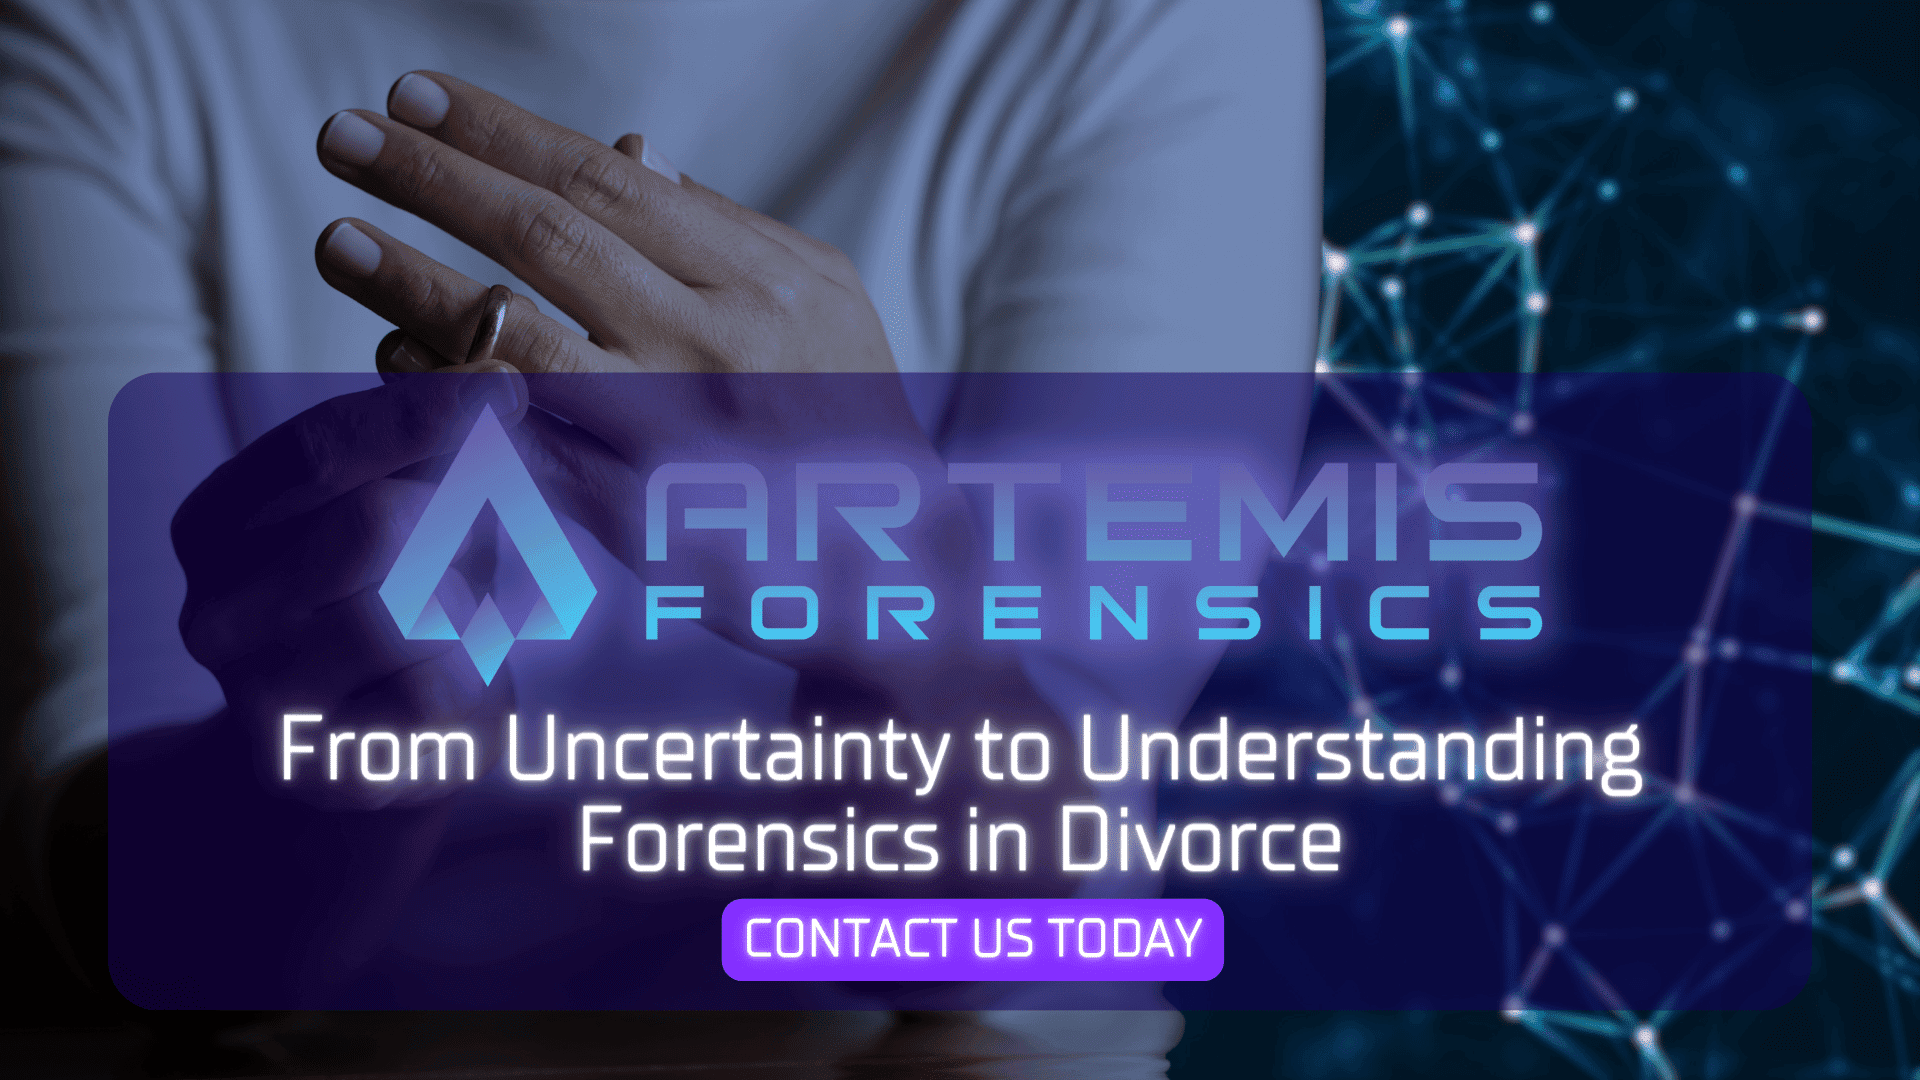 person removing wedding ring, with text "Artemis Forensics - From Uncertainty to Understanding Forensics in Divorce CONTACT US TODAY"